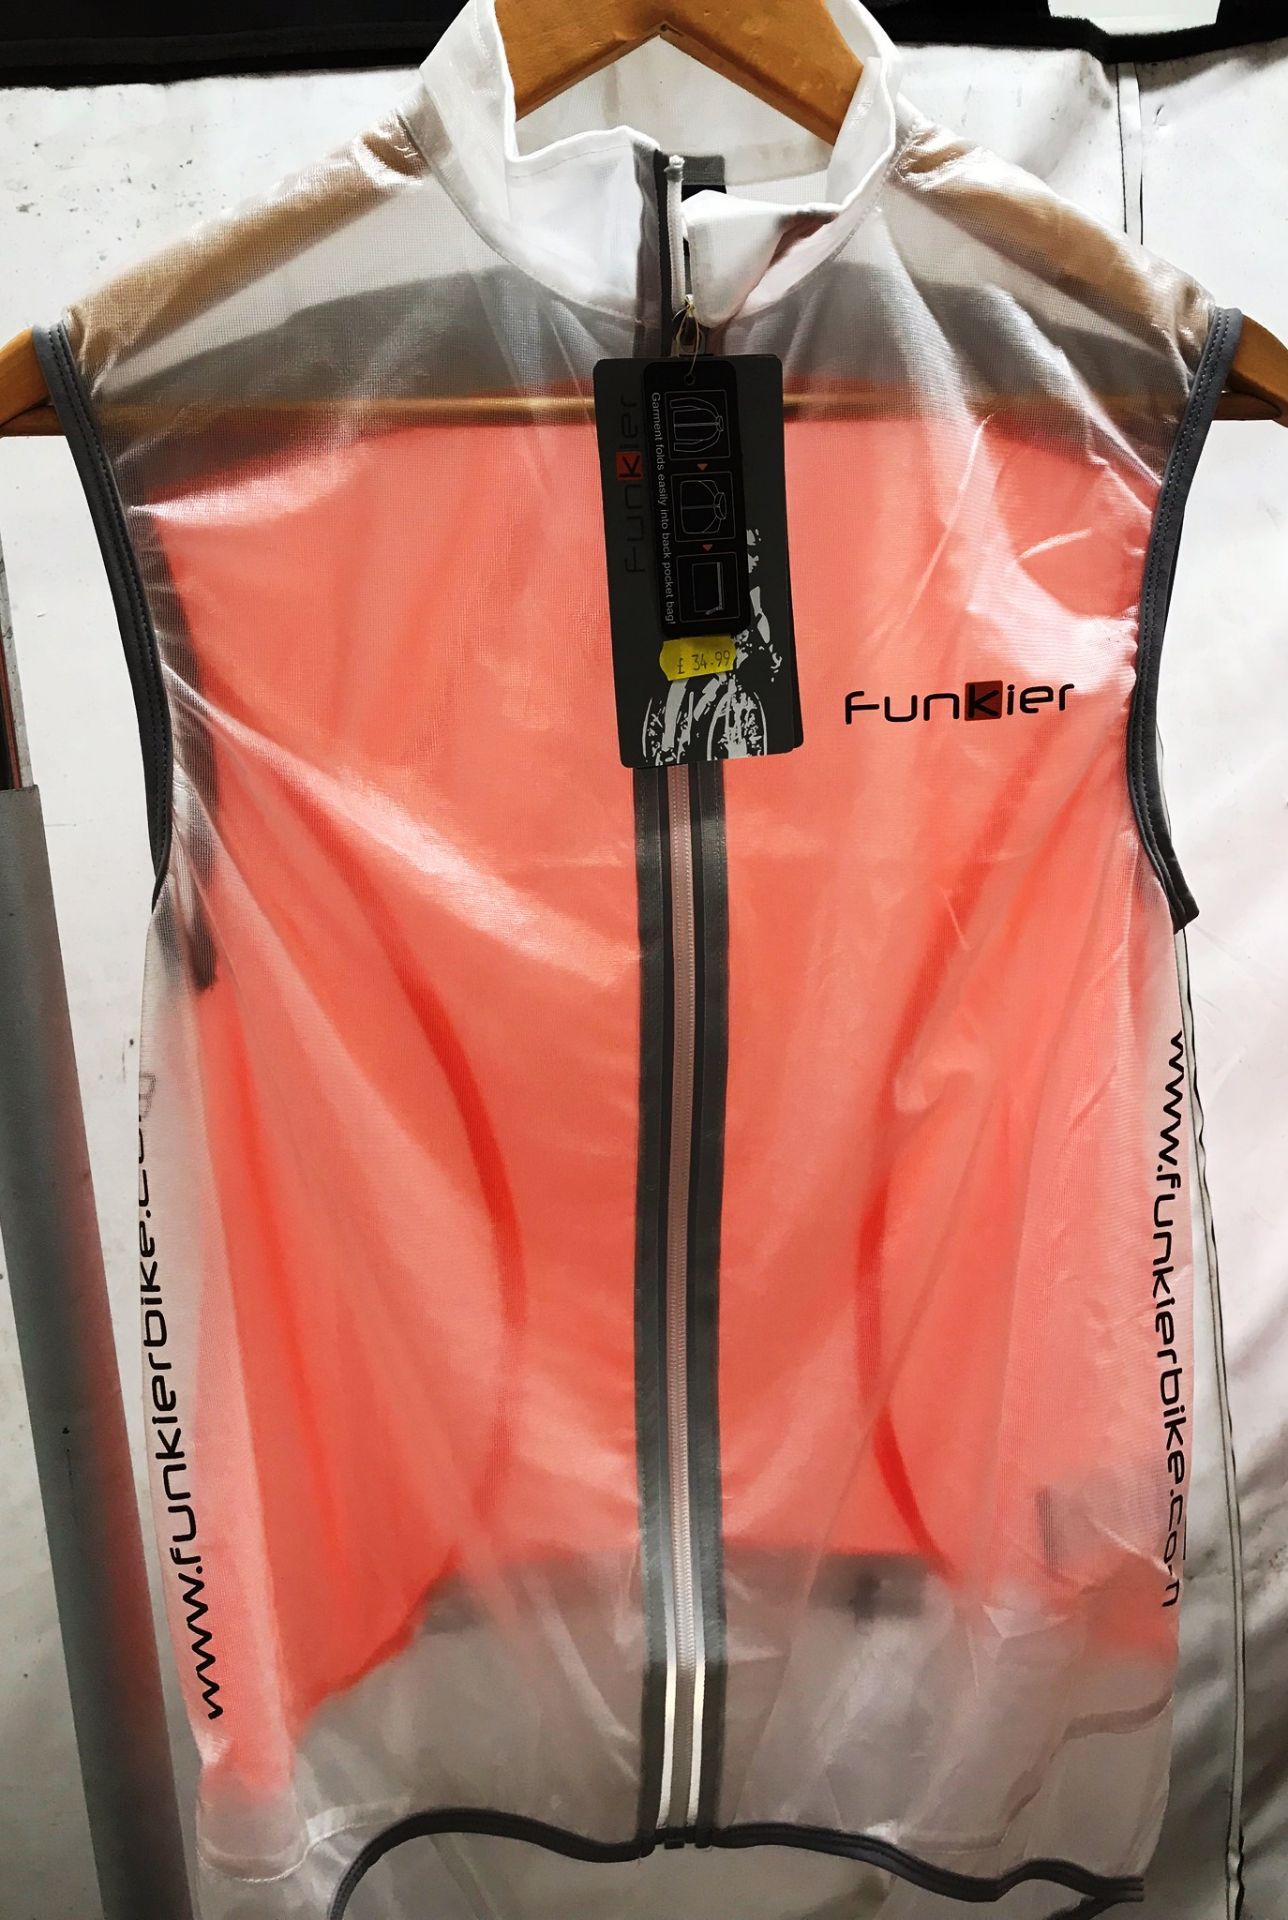 5 x Funkier Cycling Transparent Windbreaker Gilets - Various Sizes - RRP £174.95 - New w/ Tags - Image 2 of 4